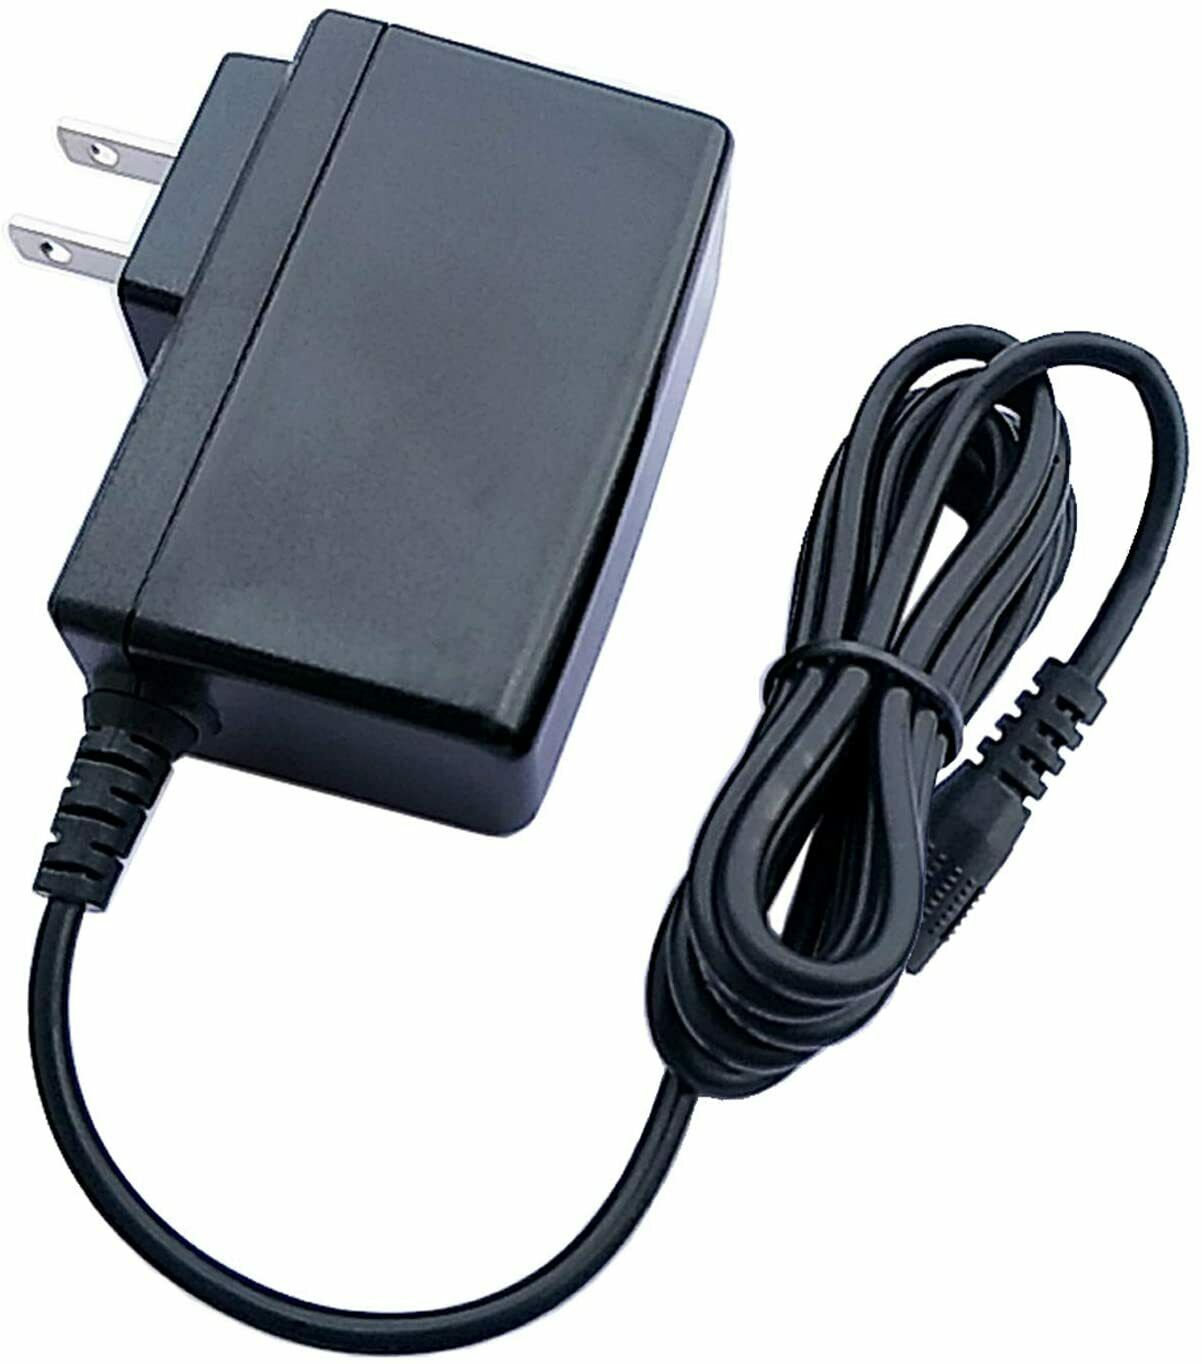 AC/DC Adapter Charger for WowWee CHiP Robot Toy Dog - Smartbed Power Supply Cord Country/Region of Manufacture: United - Click Image to Close